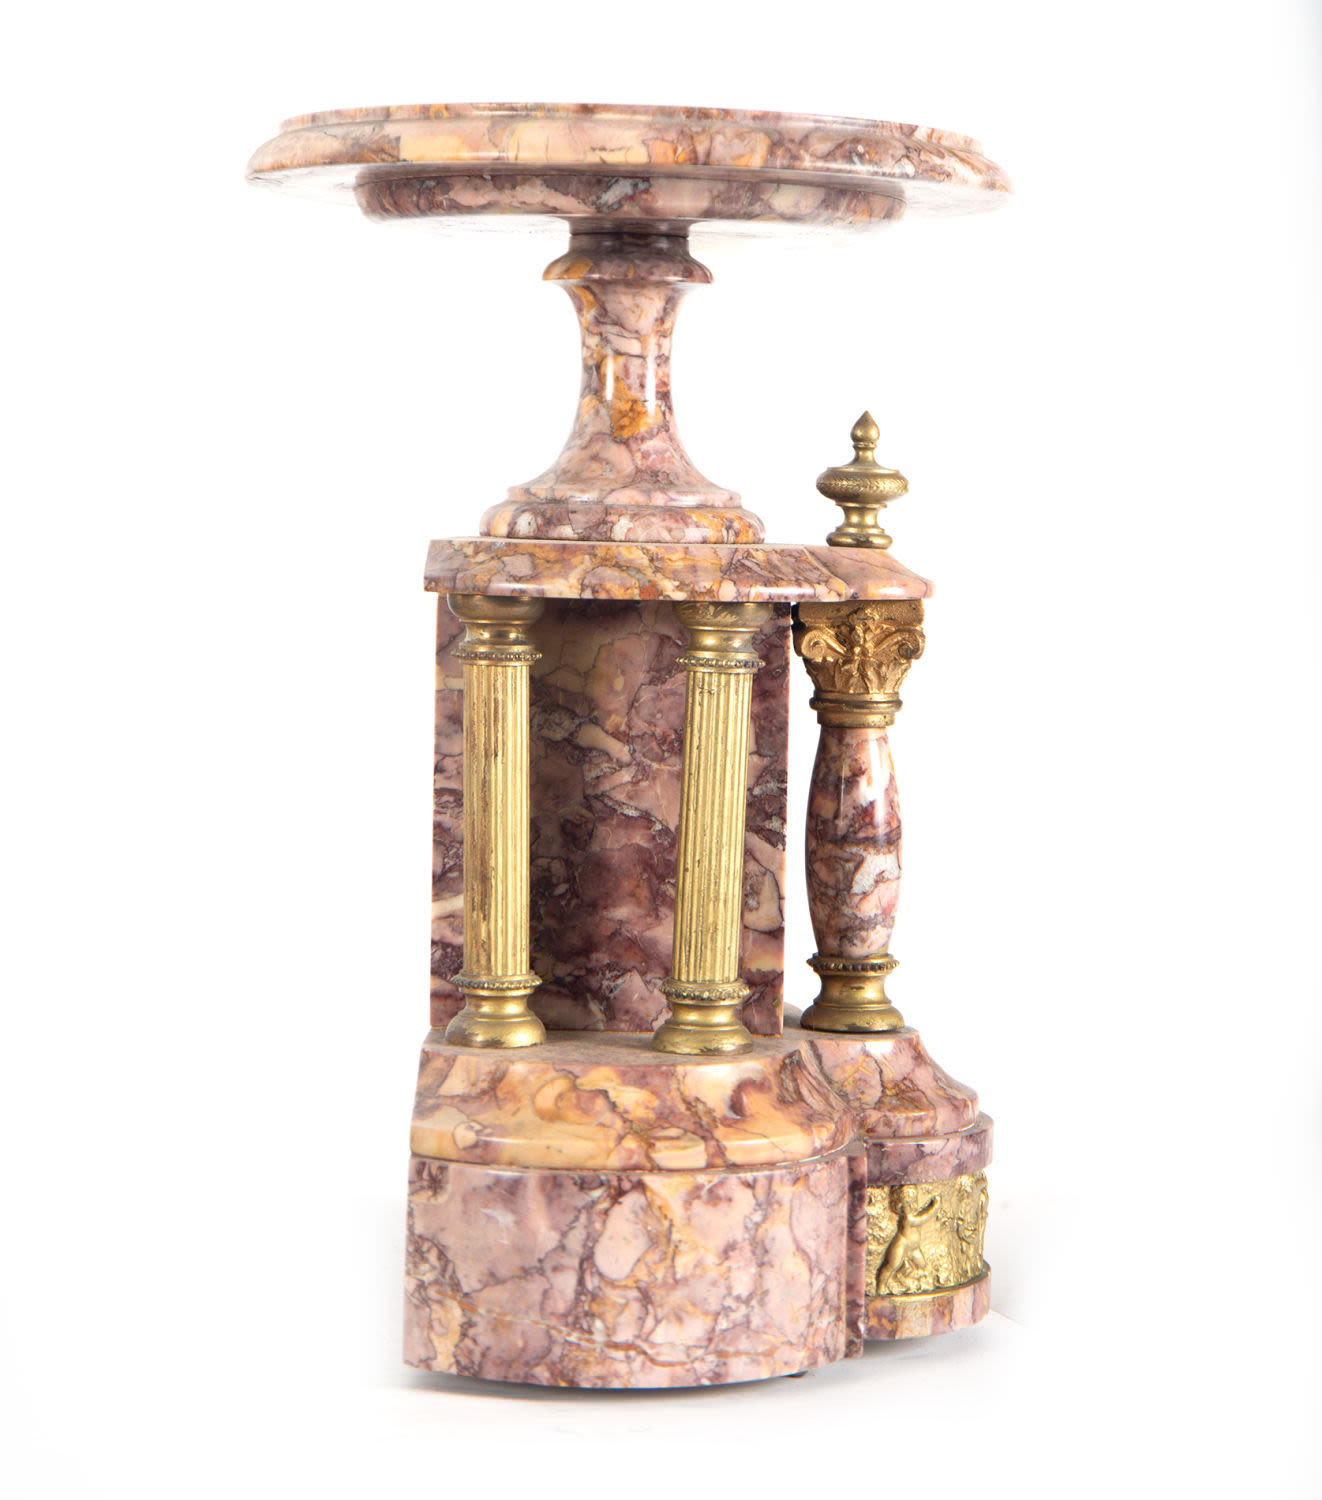 garniture in pink marble and gilt bronze, with mercury pendulum - Image 10 of 13